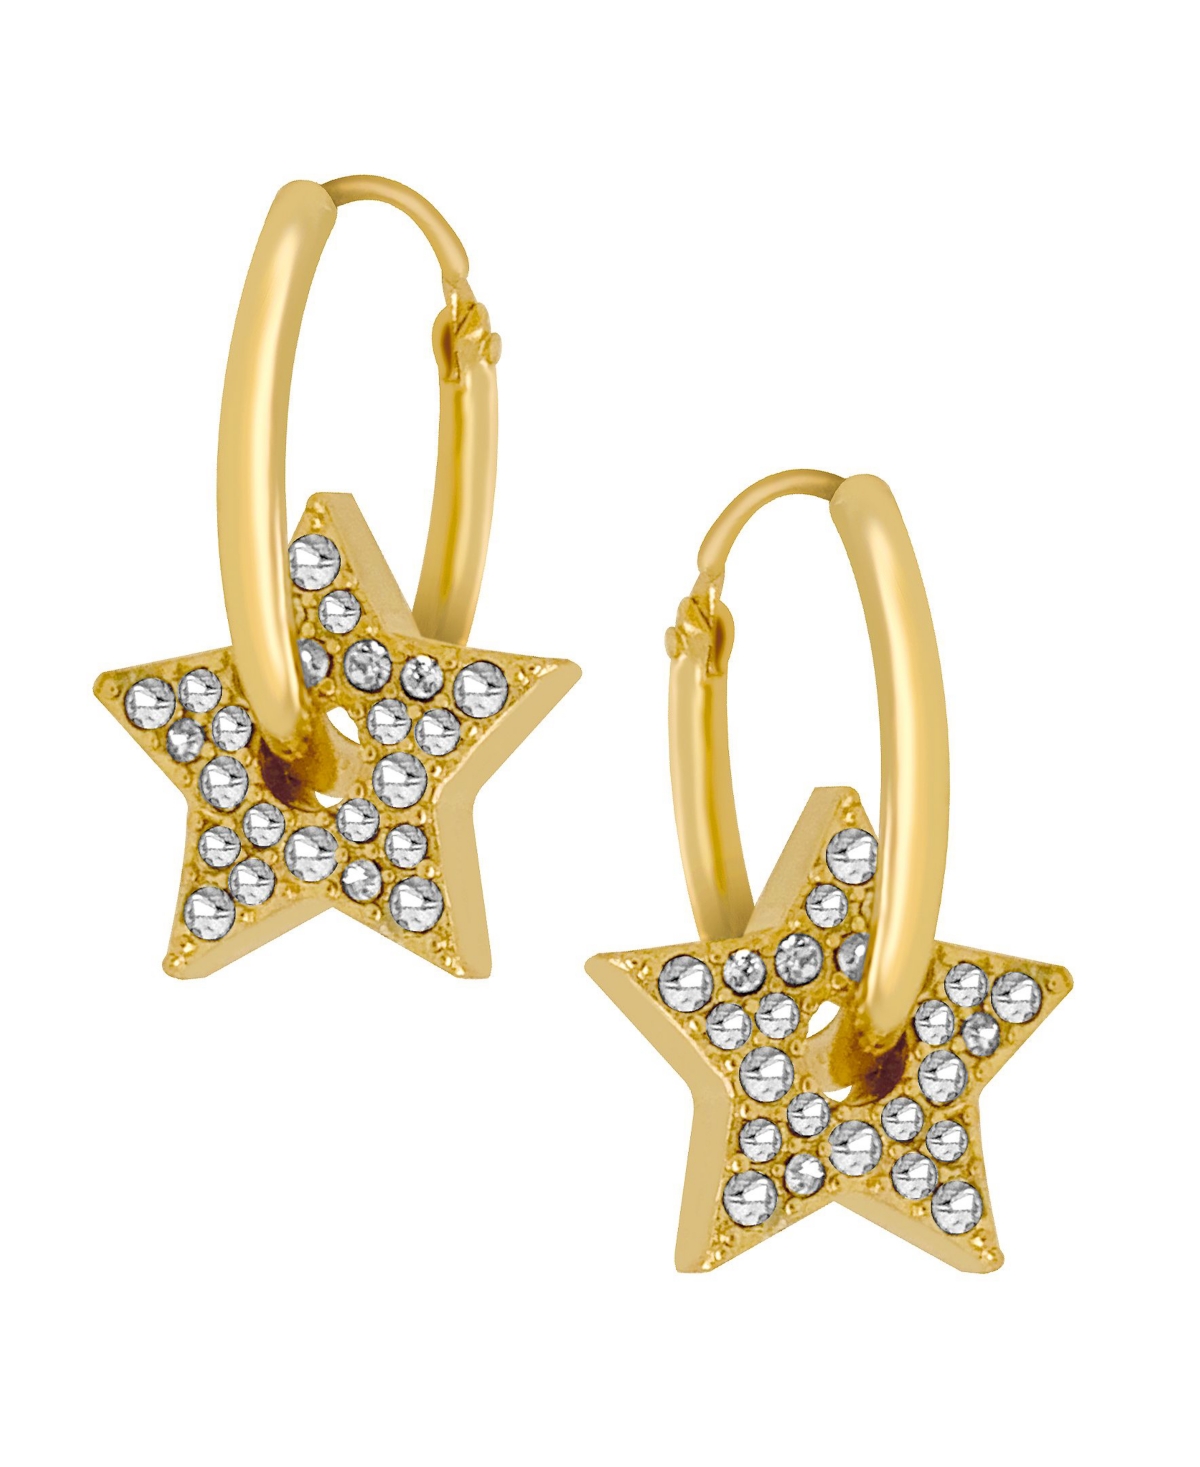 18K Gold Plated or Silver Plated Pave Stars Hoop Earrings - Gold Plated